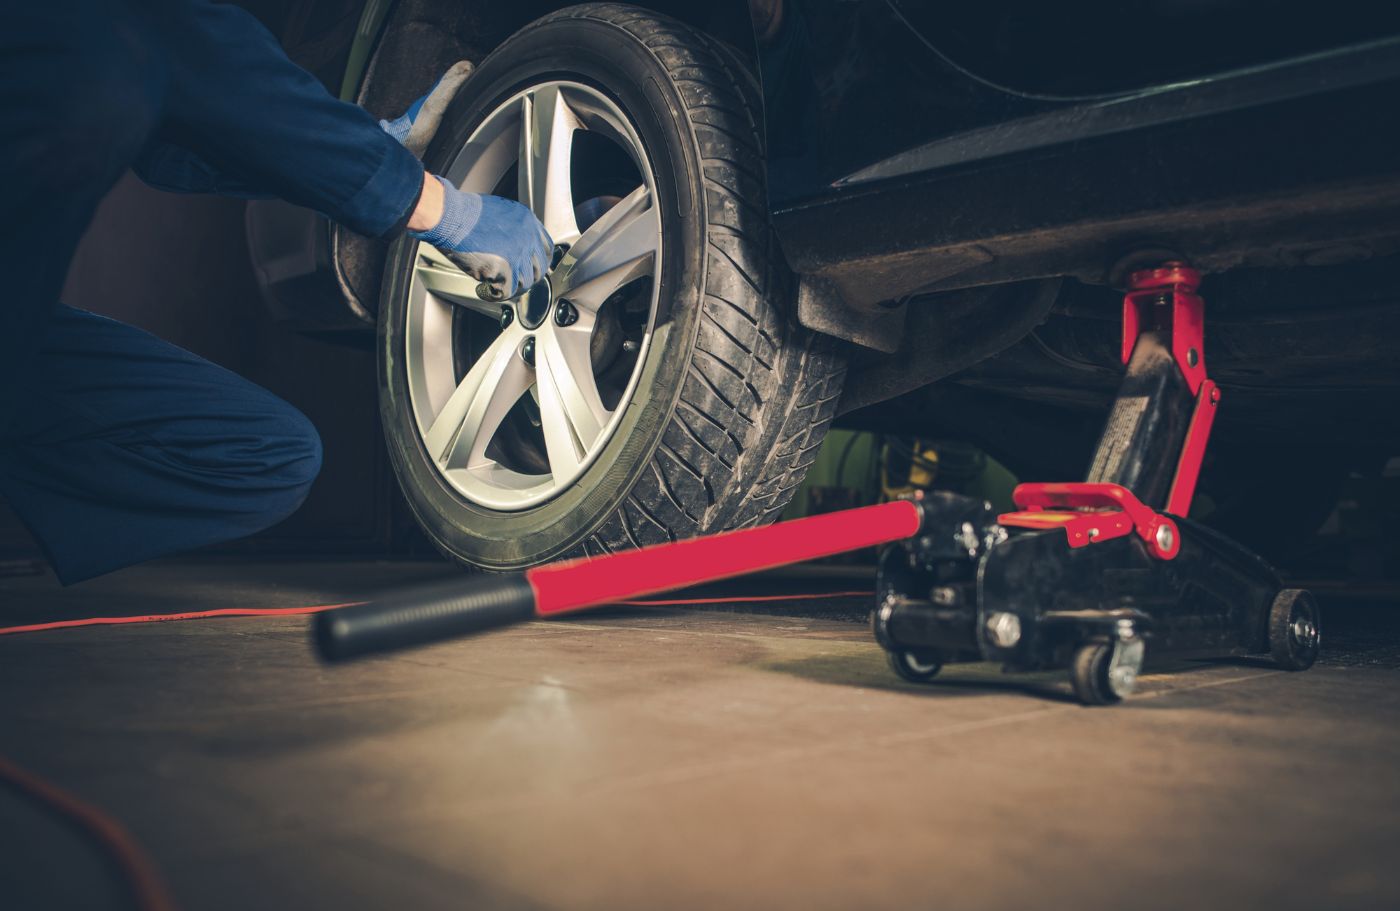 Enjoy our convenient mobile tire services from the comfort of your own home!